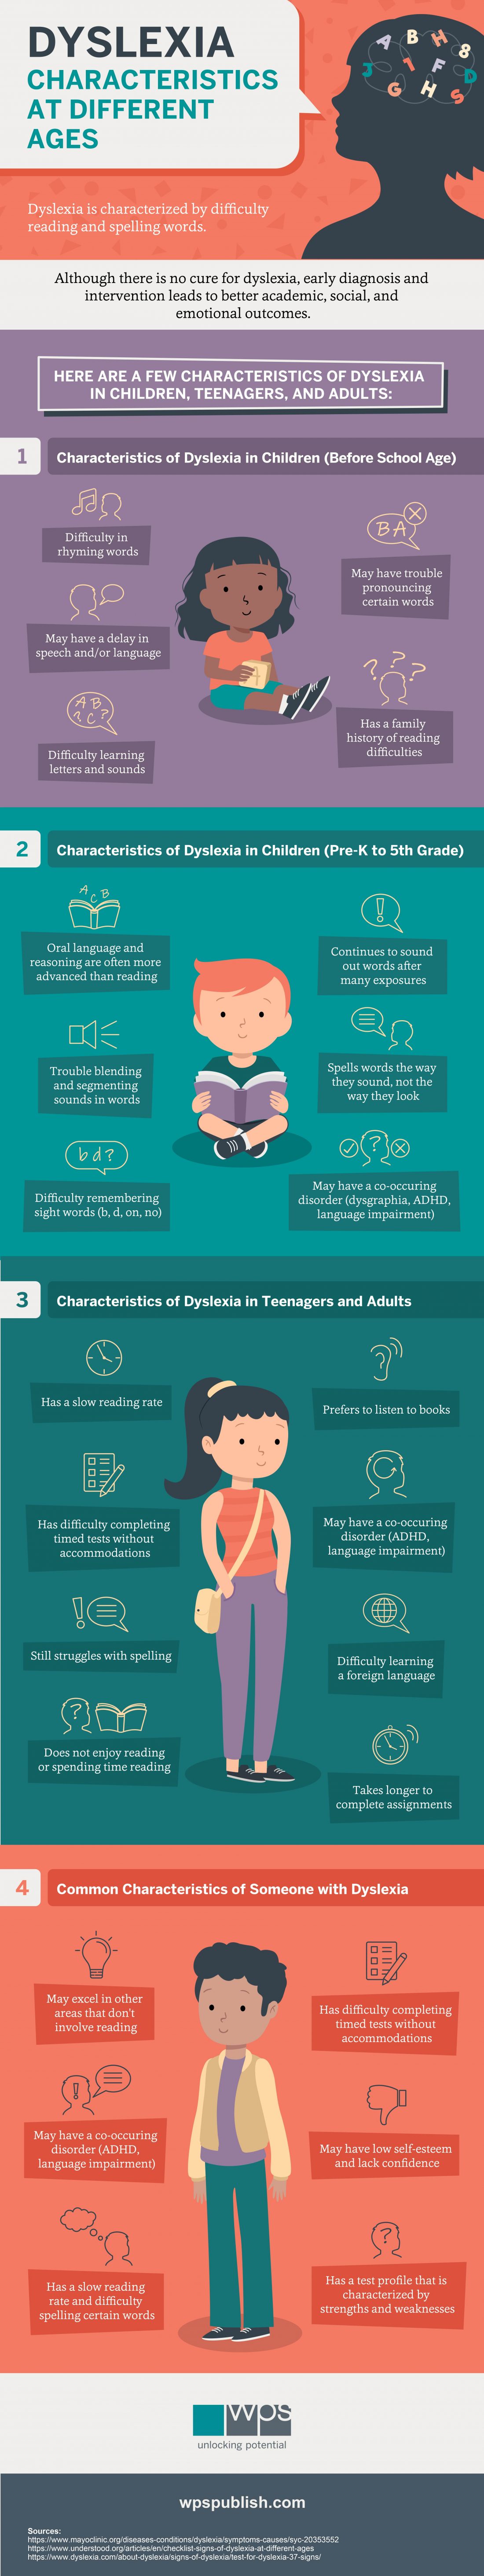 Key_Dyslexia_Characteristics_to_Look_For_When_Testing_IG_042022_copy-min